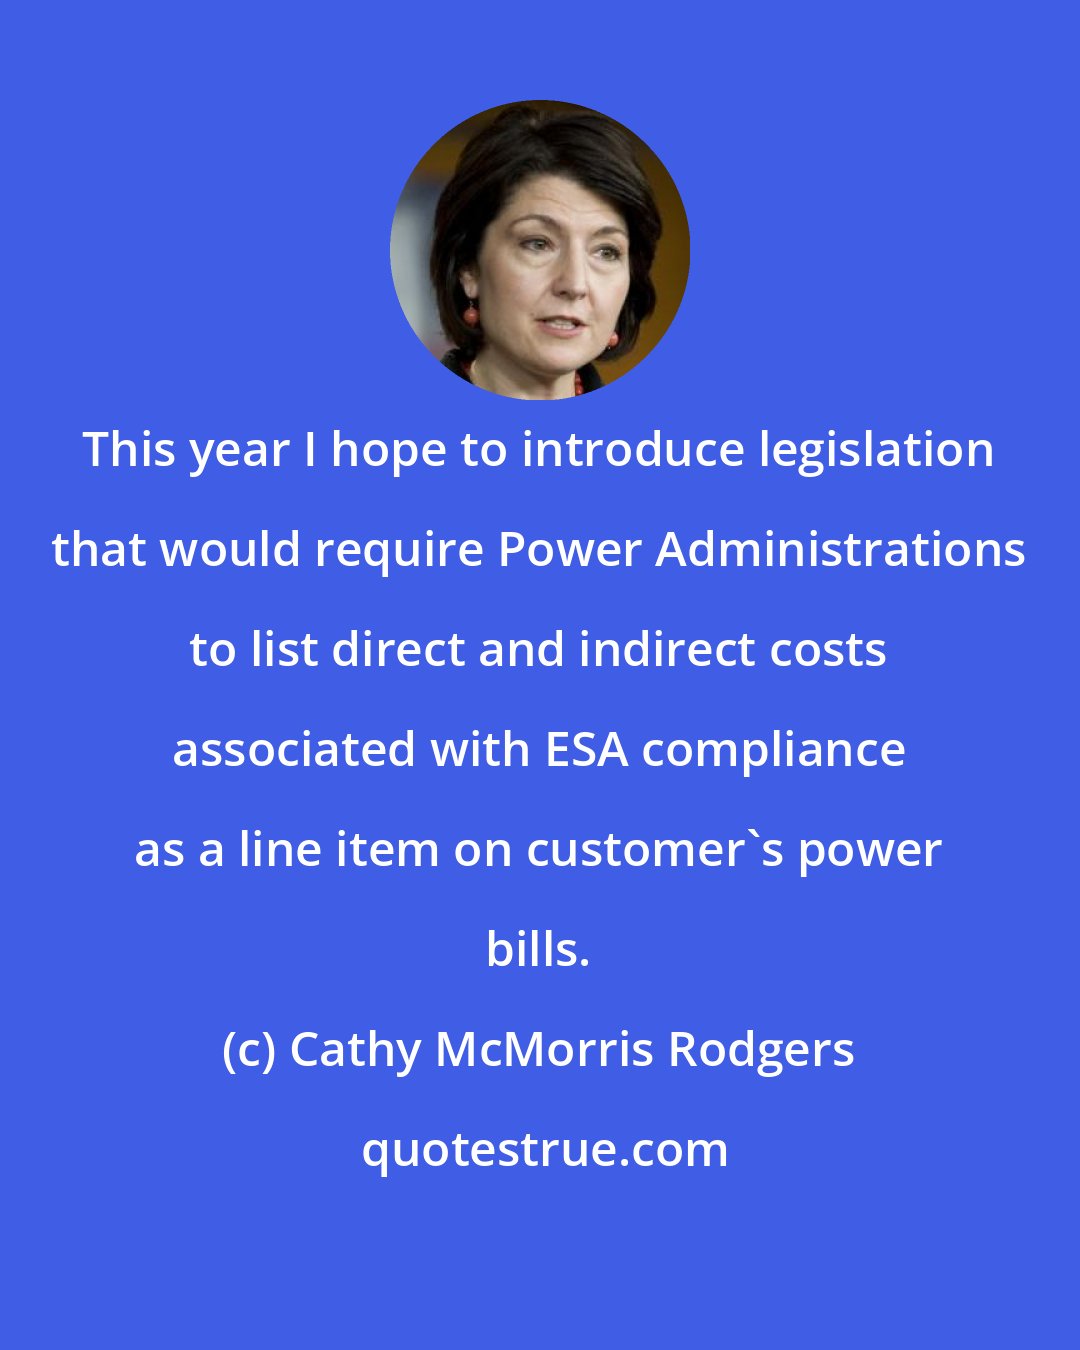 Cathy McMorris Rodgers: This year I hope to introduce legislation that would require Power Administrations to list direct and indirect costs associated with ESA compliance as a line item on customer's power bills.